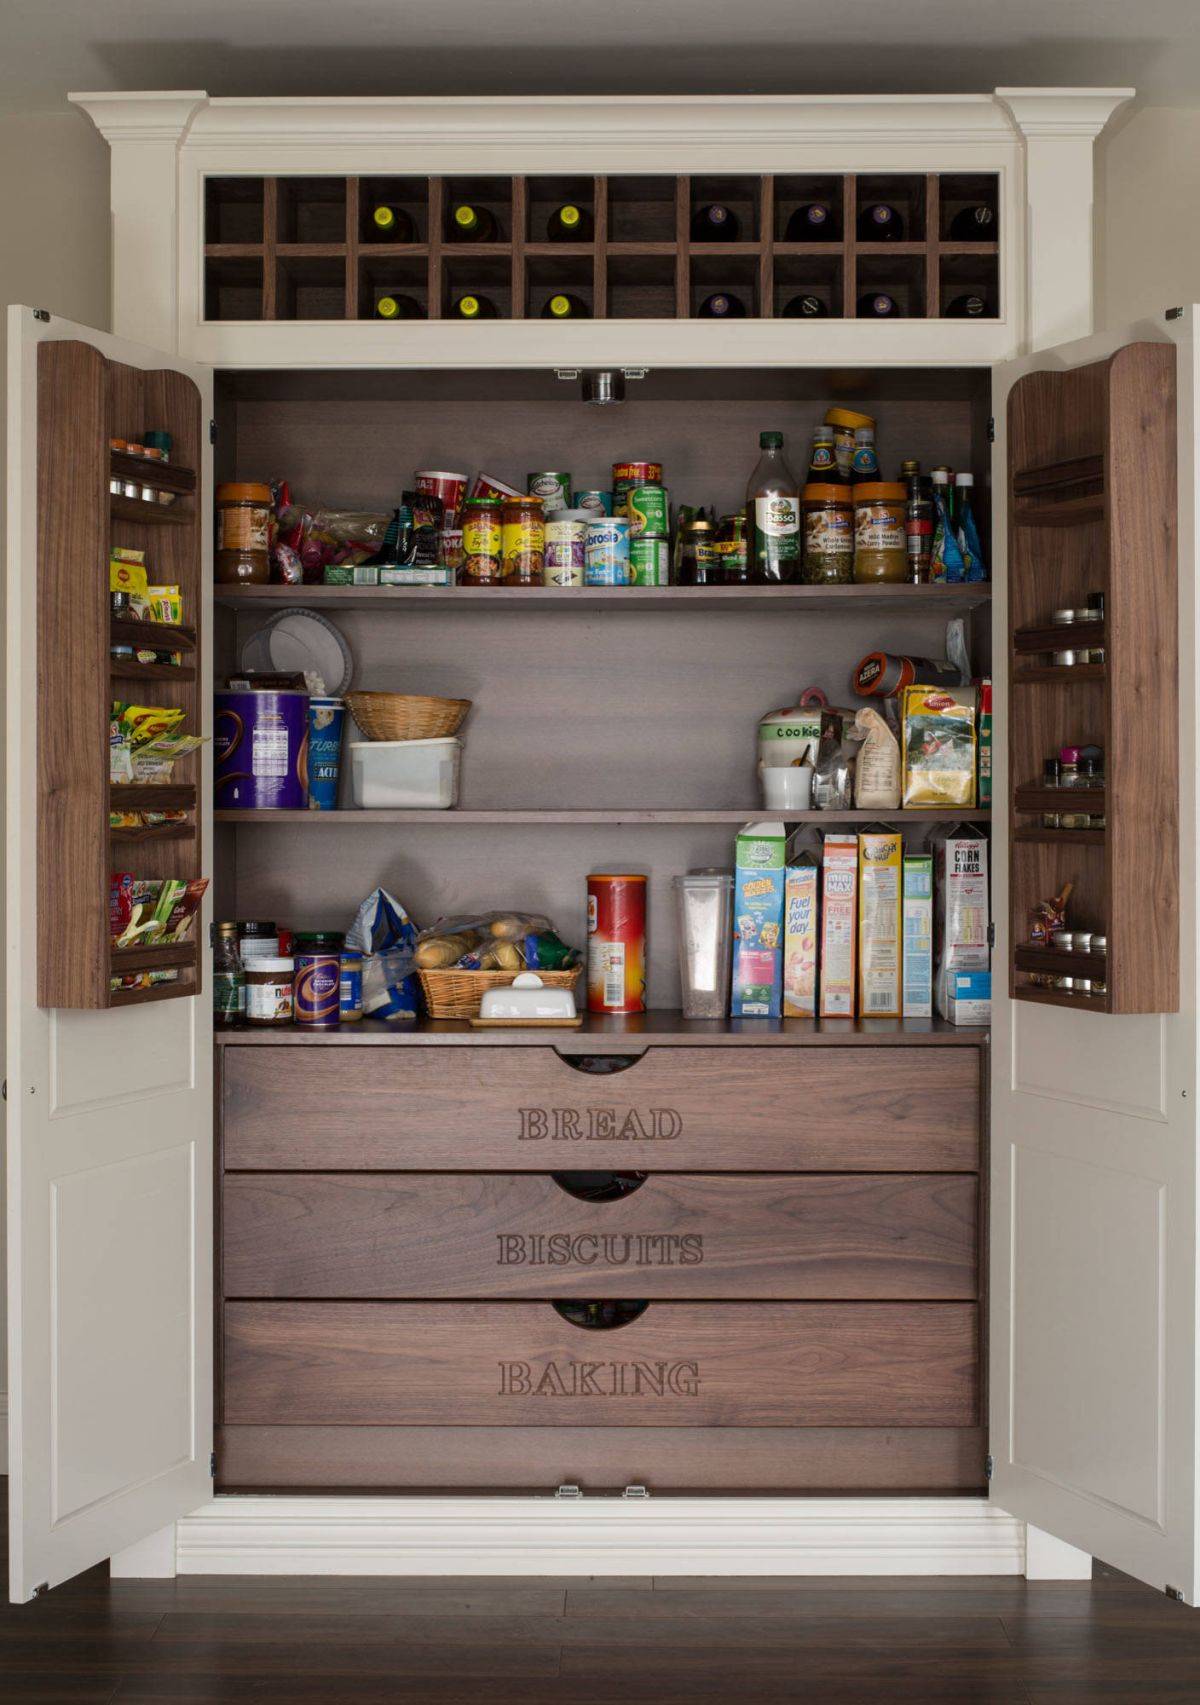 Small, space-savvy kitchen pantries help organize your home much better